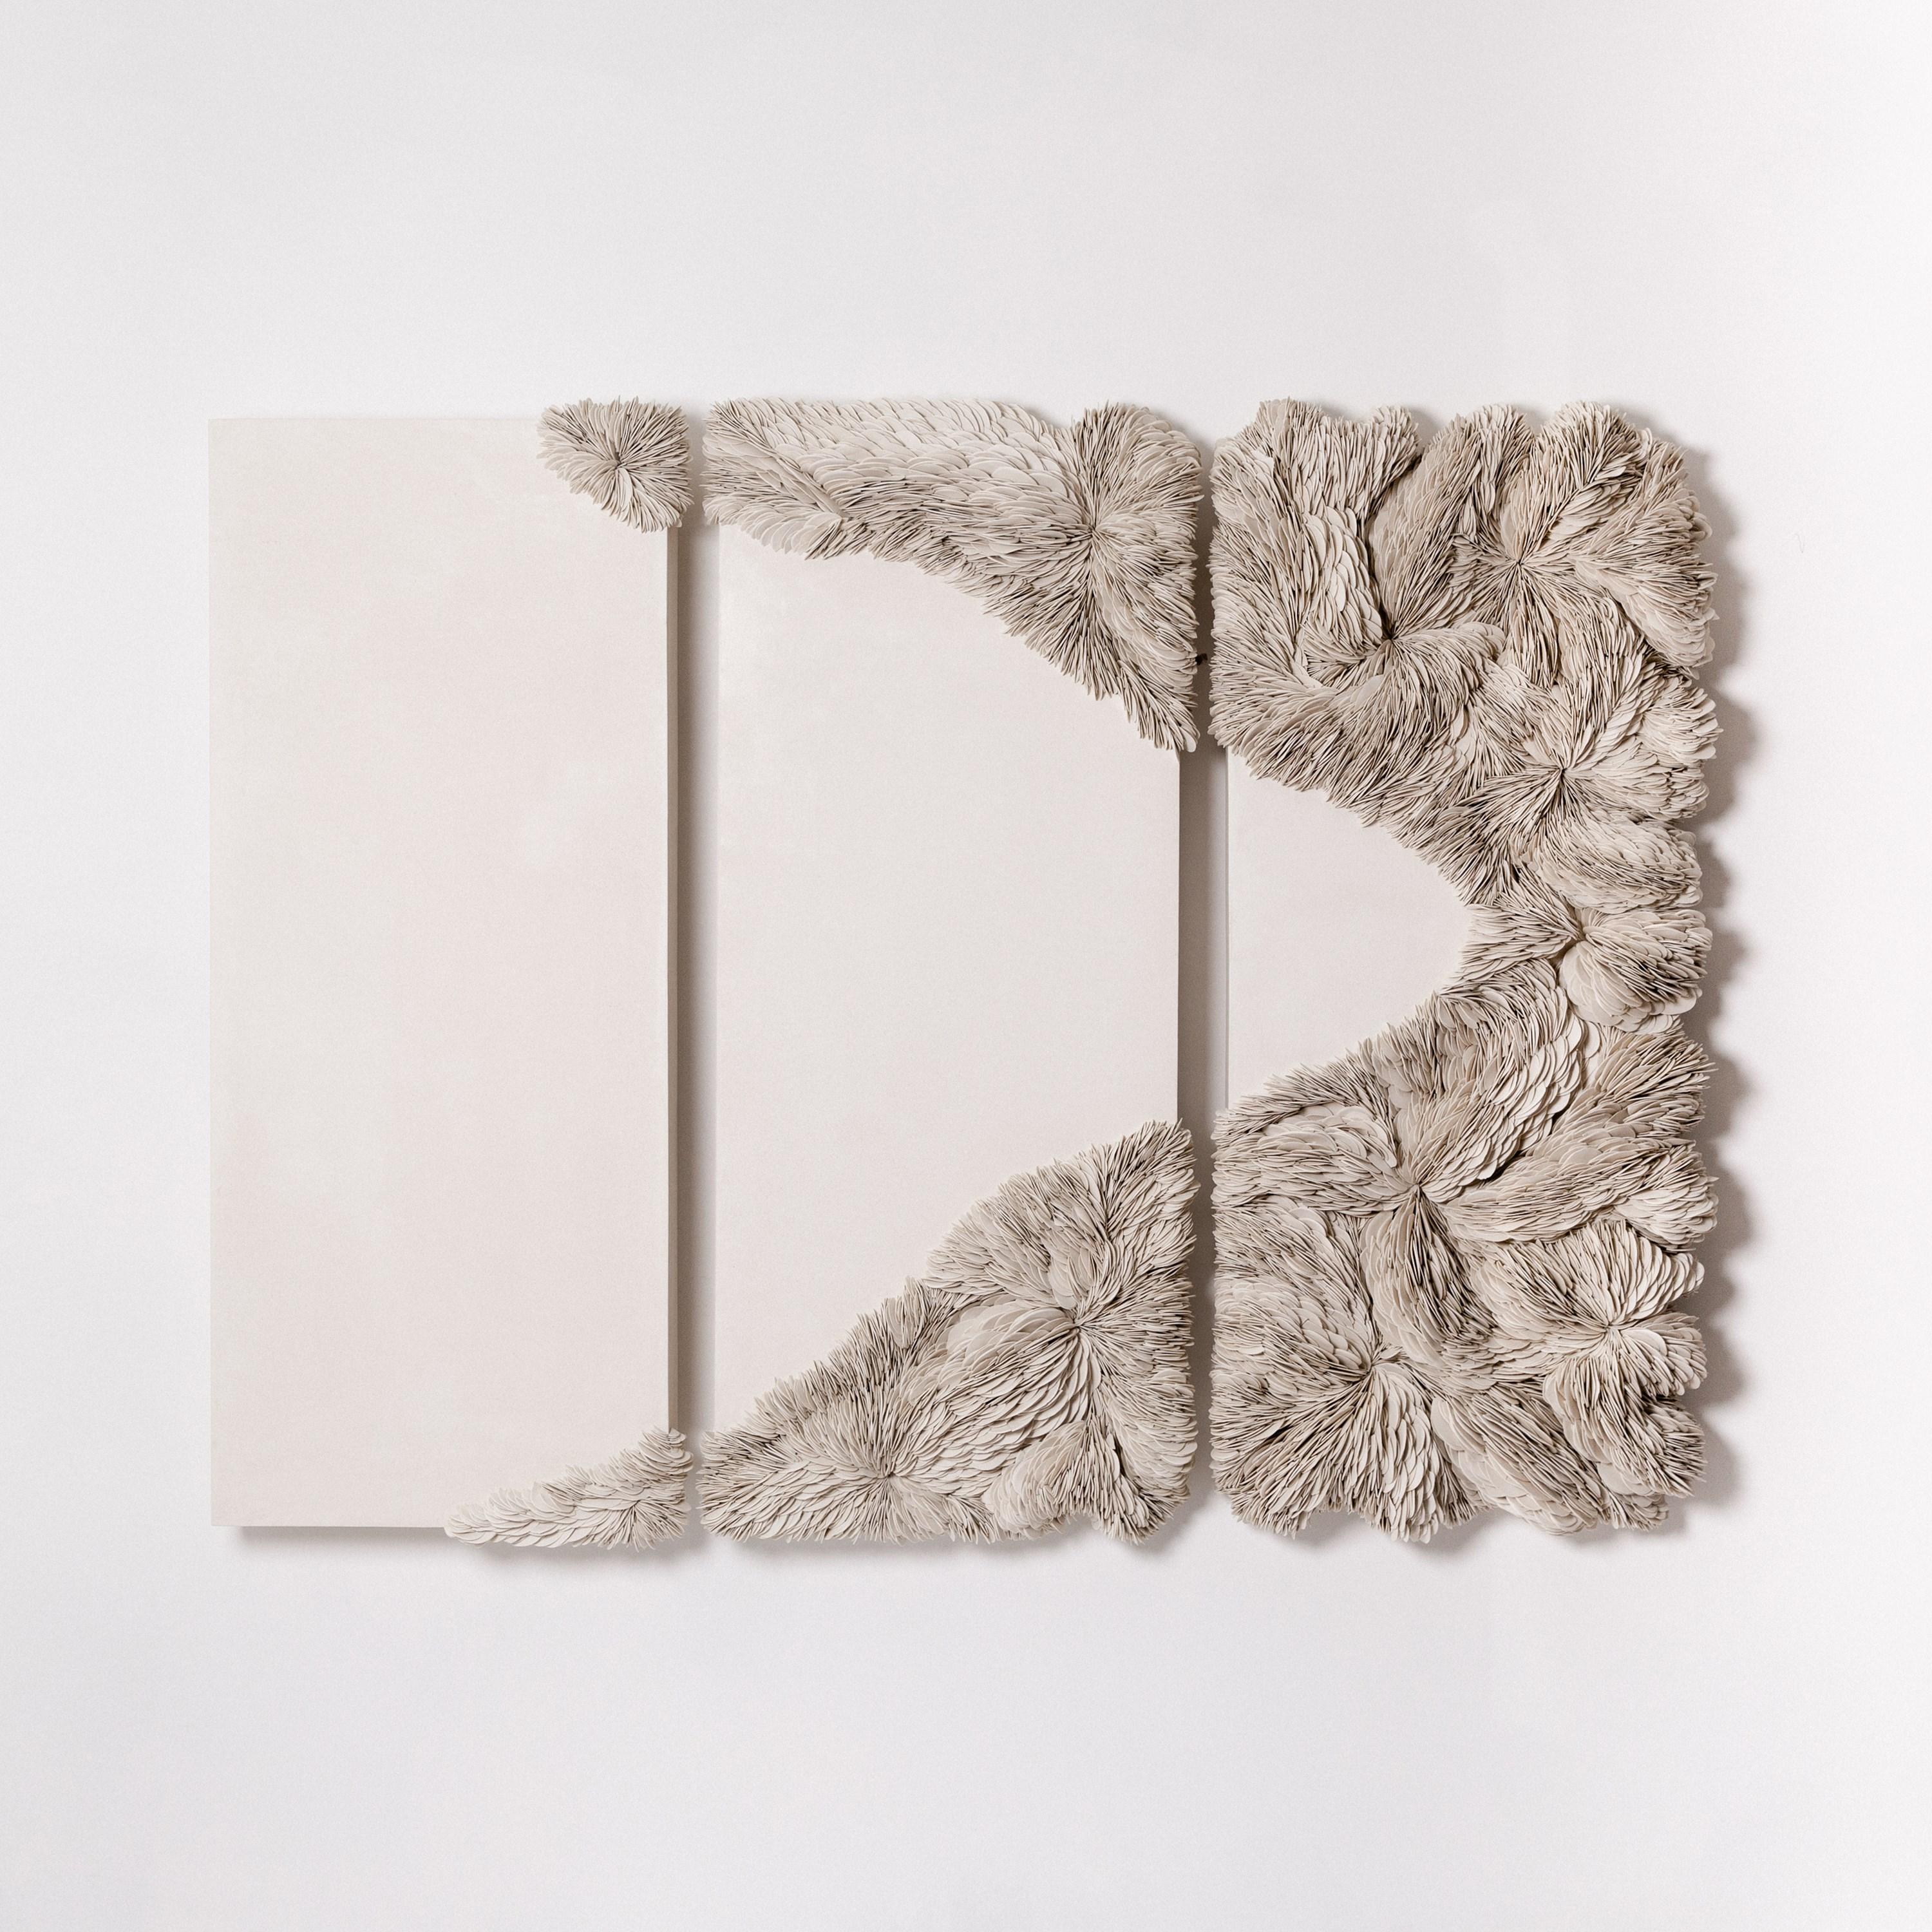 'Collapsed Triptych in Sand' is a unique wall-mounted sculptural artwork by the British artist, Olivia Walker. It has been created from coloured porcelain, tadelakt plaster and resin. The dimensions above are for the three panels.

Walker works in